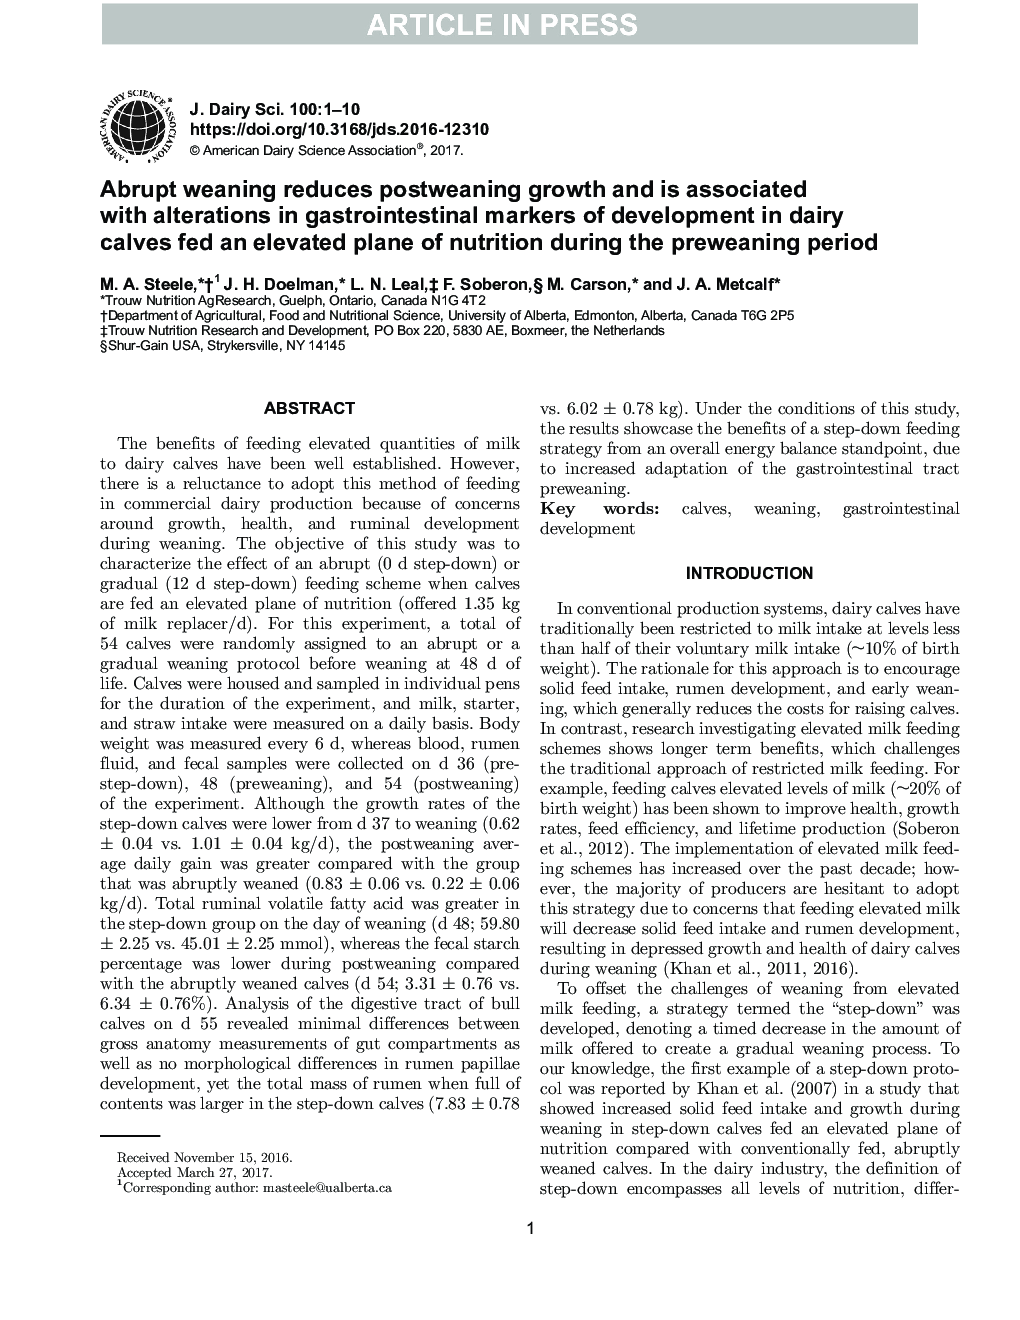 Abrupt weaning reduces postweaning growth and is associated with alterations in gastrointestinal markers of development in dairy calves fed an elevated plane of nutrition during the preweaning period